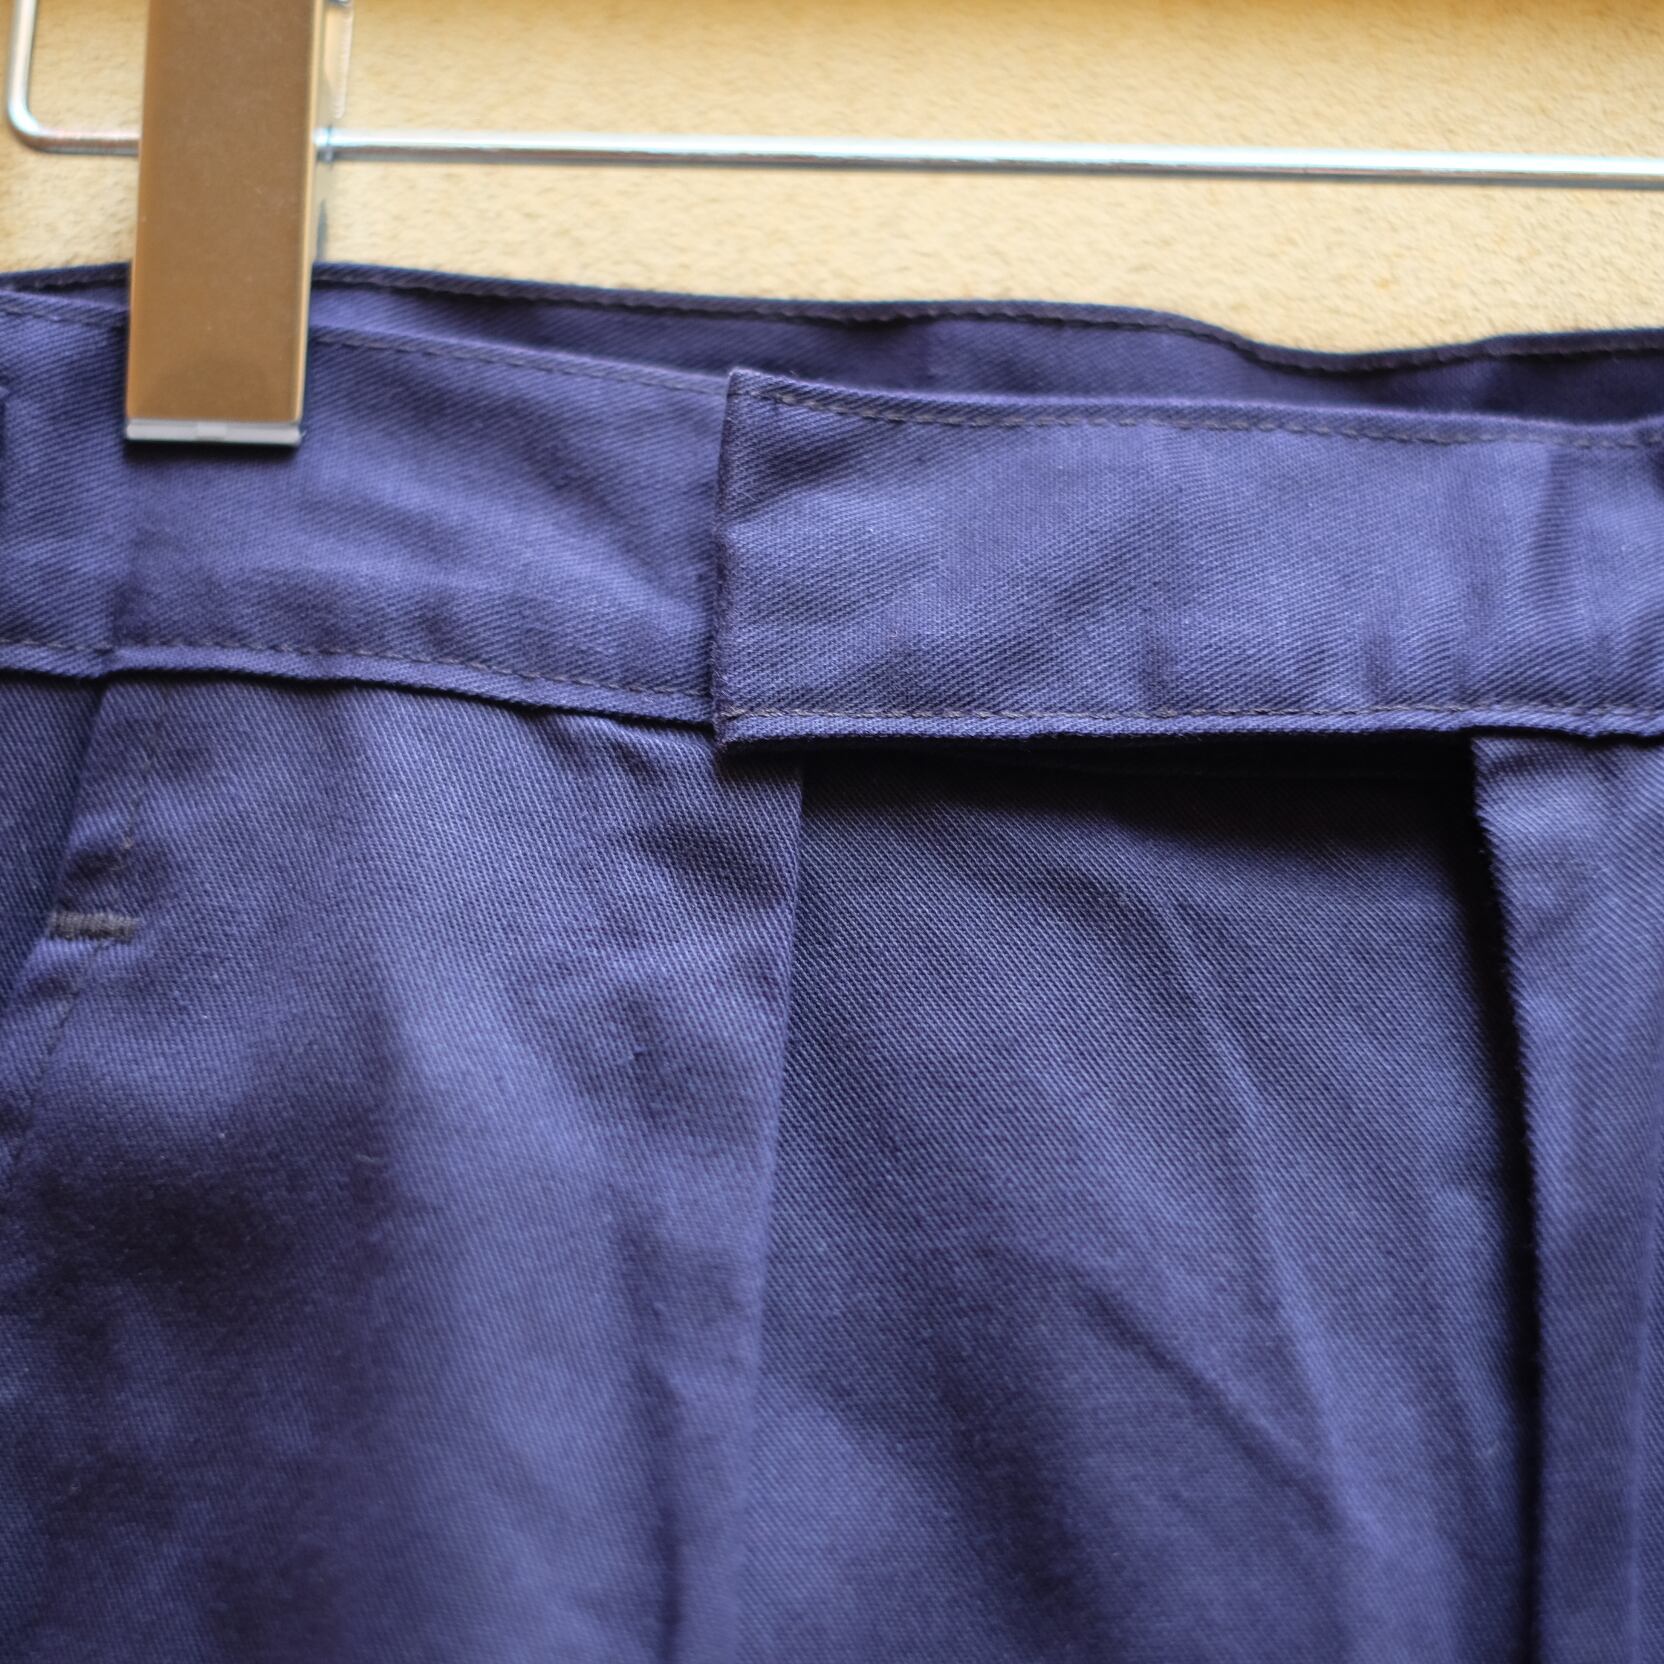 OLD ROYAL NAVY WORKING DRESS TROUSERS | STRAYSHEEP